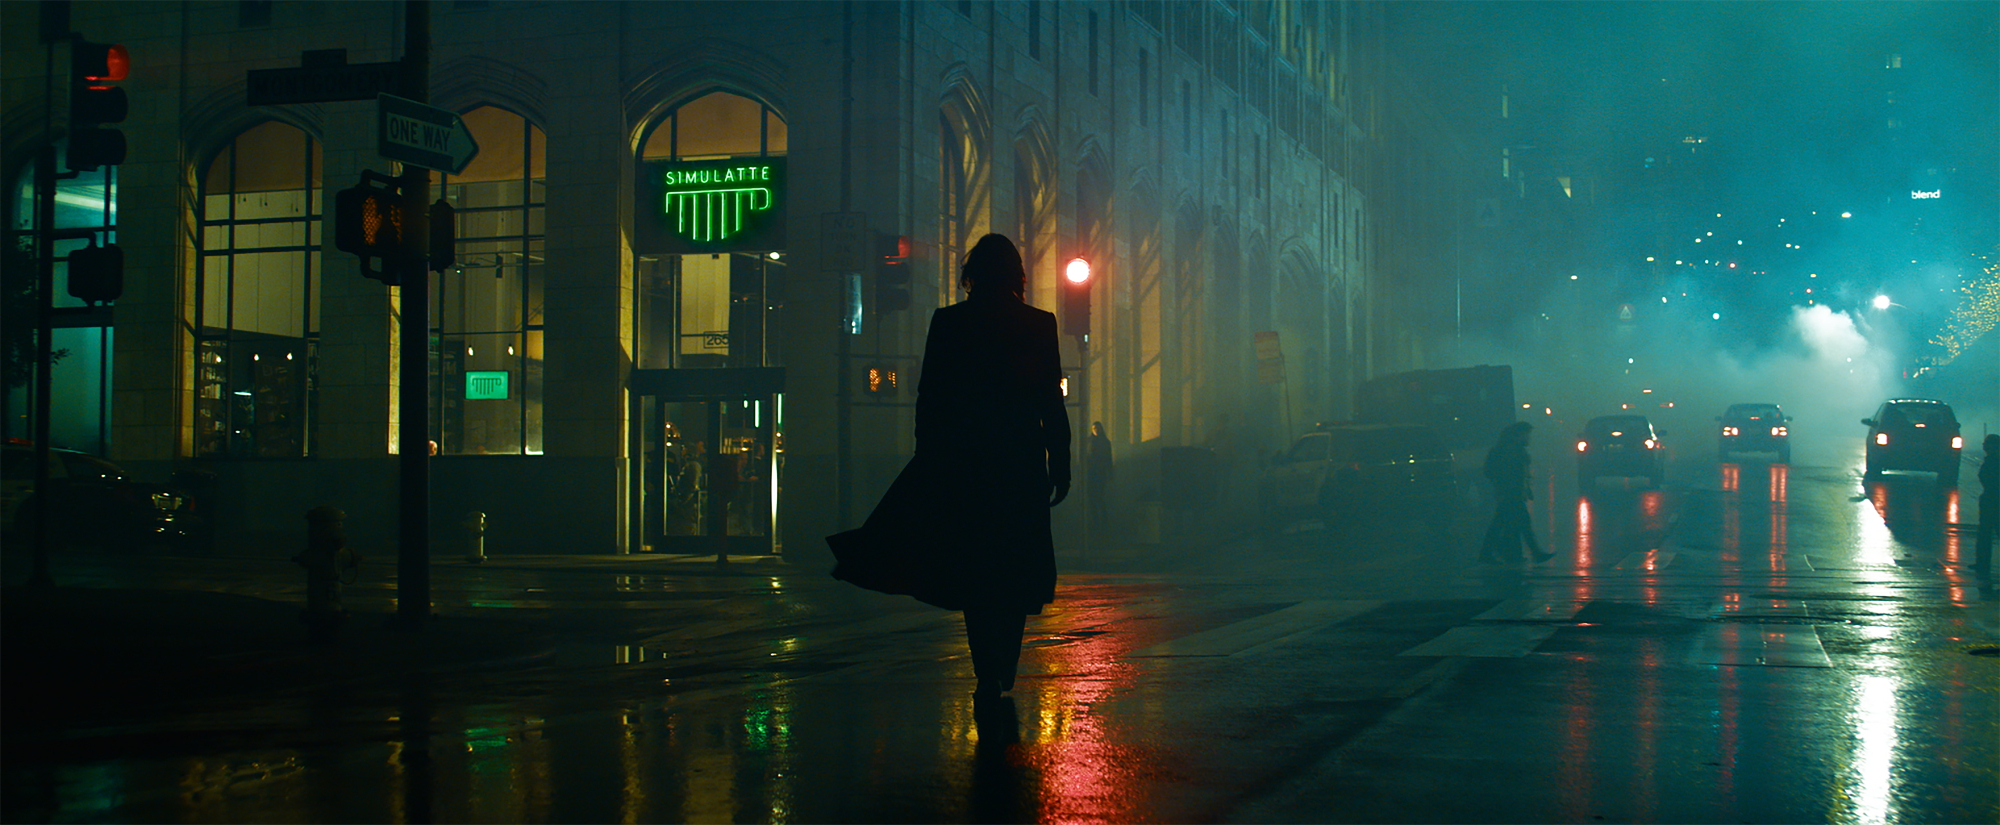 'The Matrix Resurrection' plot with Keanu Reeves as Neo/Thomas Anderson walking down a wet, dark street with a neon sign in the background